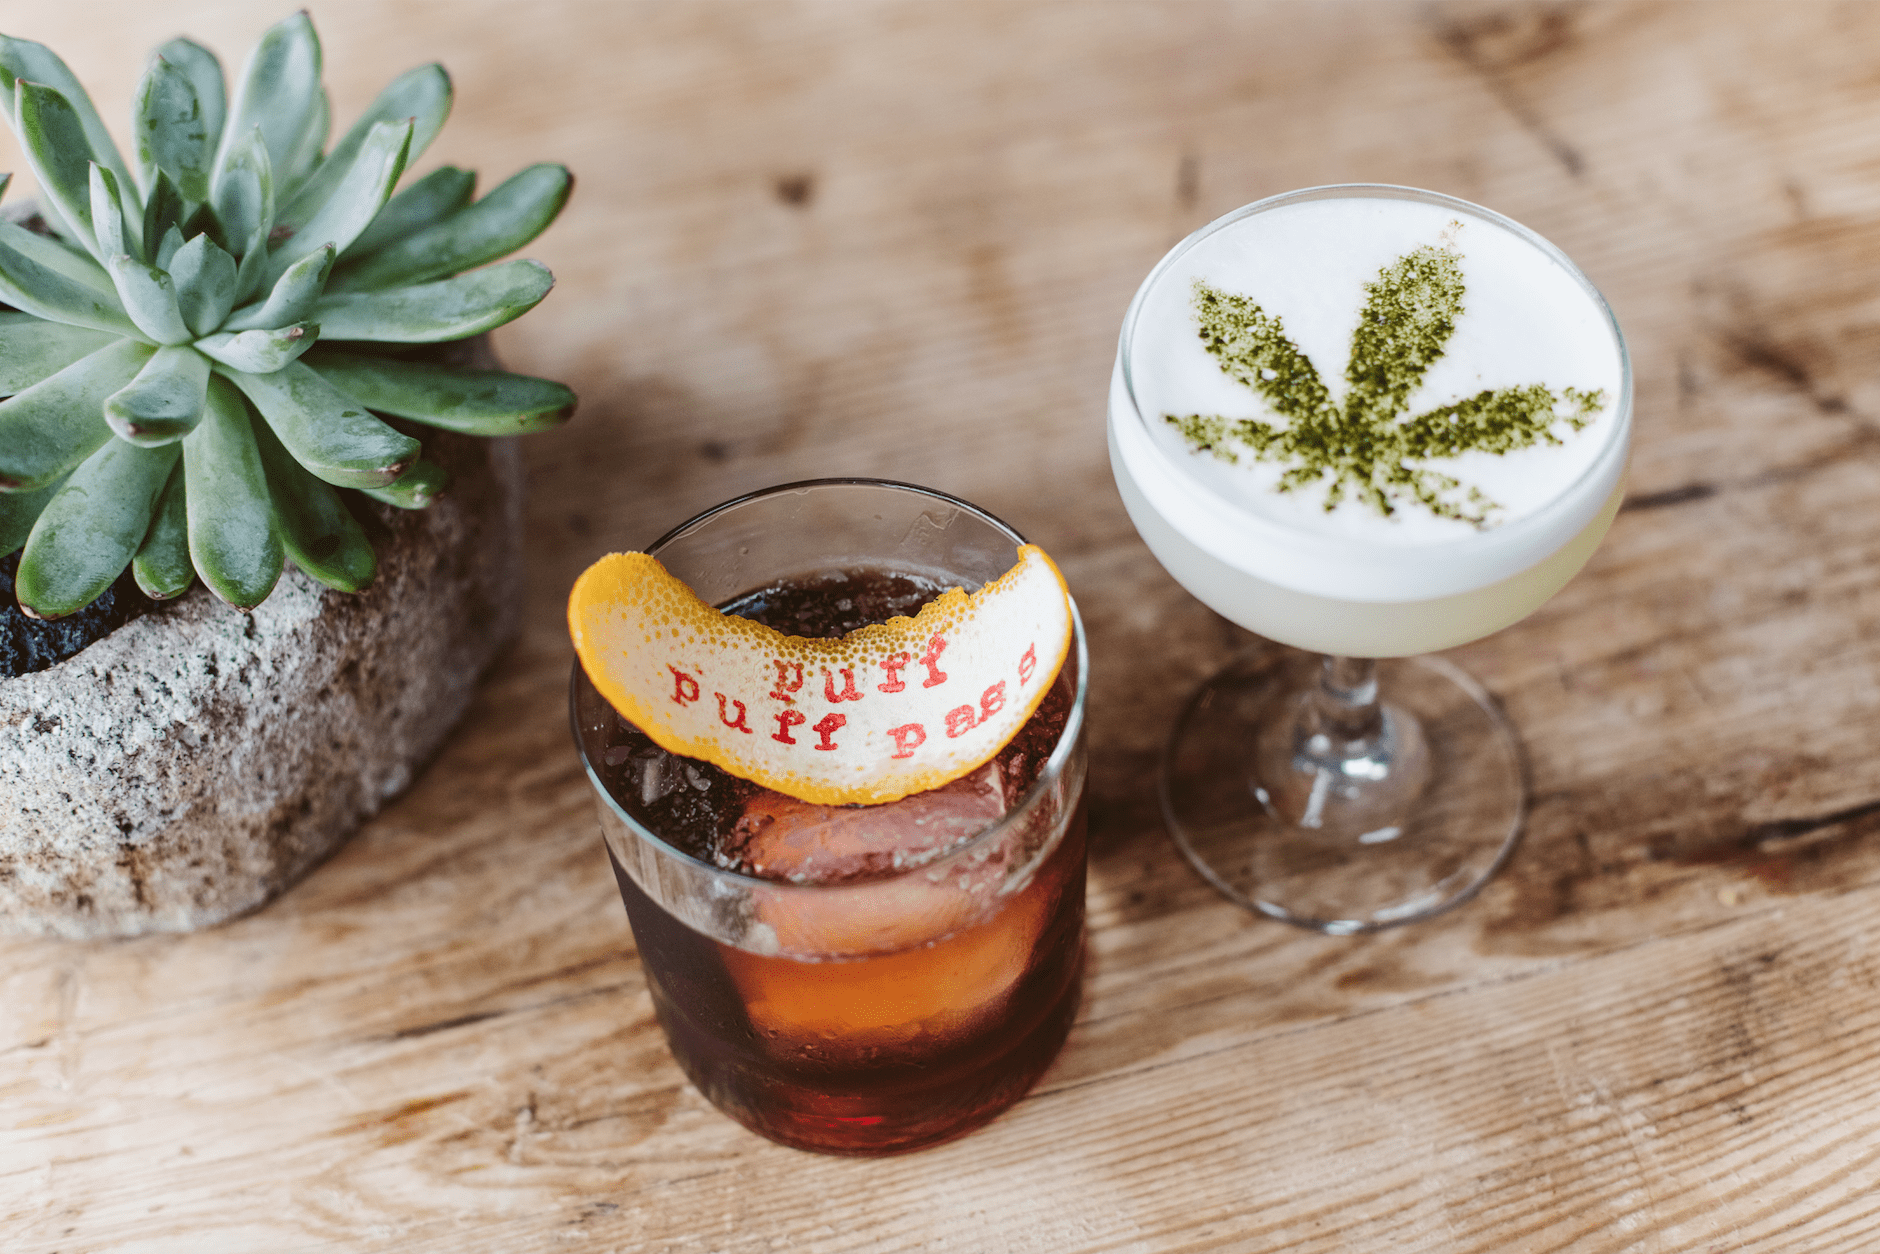 How To Make the Best Cannabis-Infused Drinks